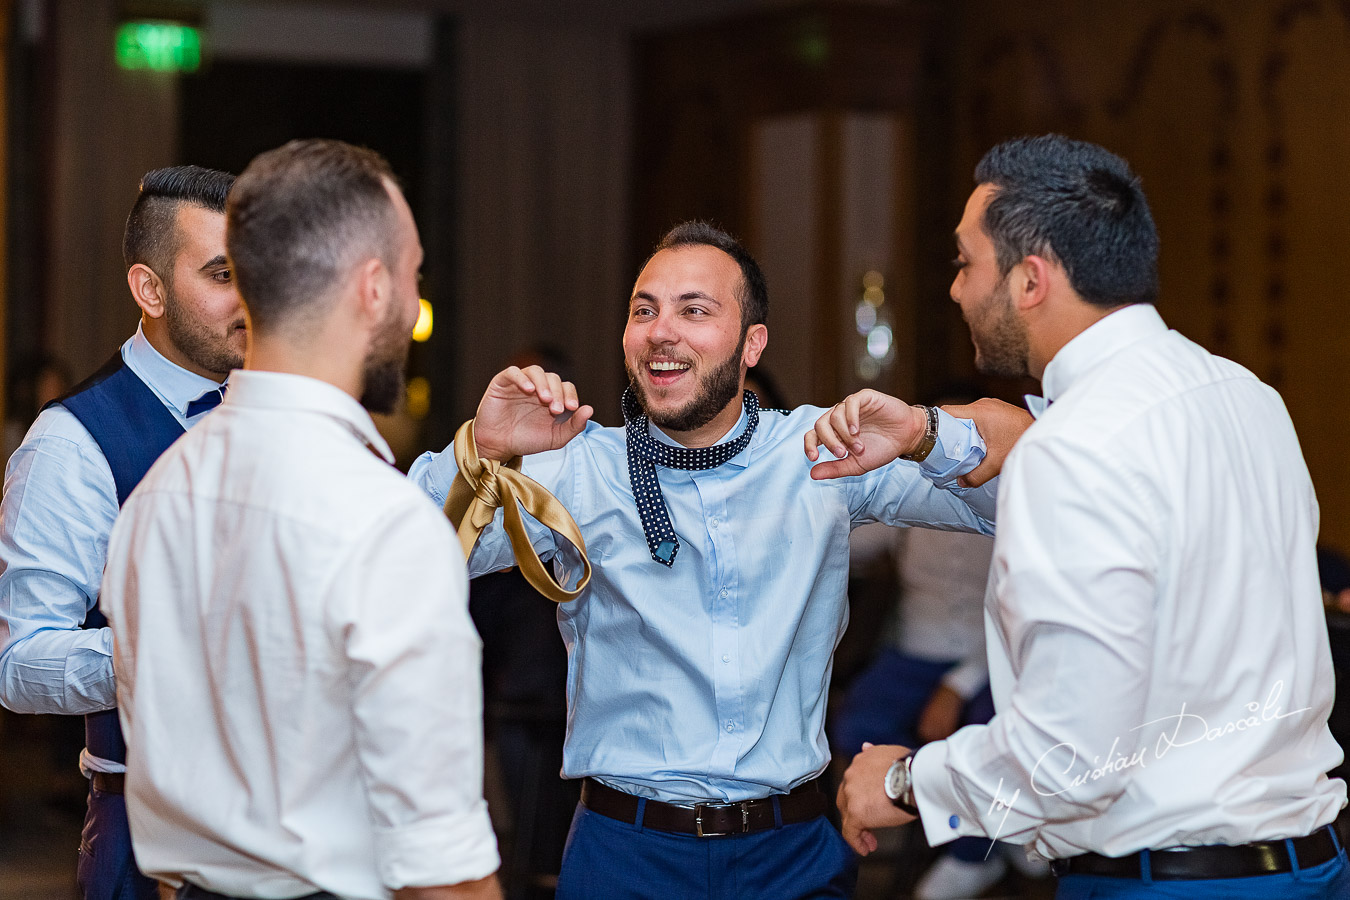 Moment when the groom is prepared for the garter photographed as part of an Exclusive Wedding photography at Grand Resort Limassol, captured by Cyprus Wedding Photographer Cristian Dascalu.